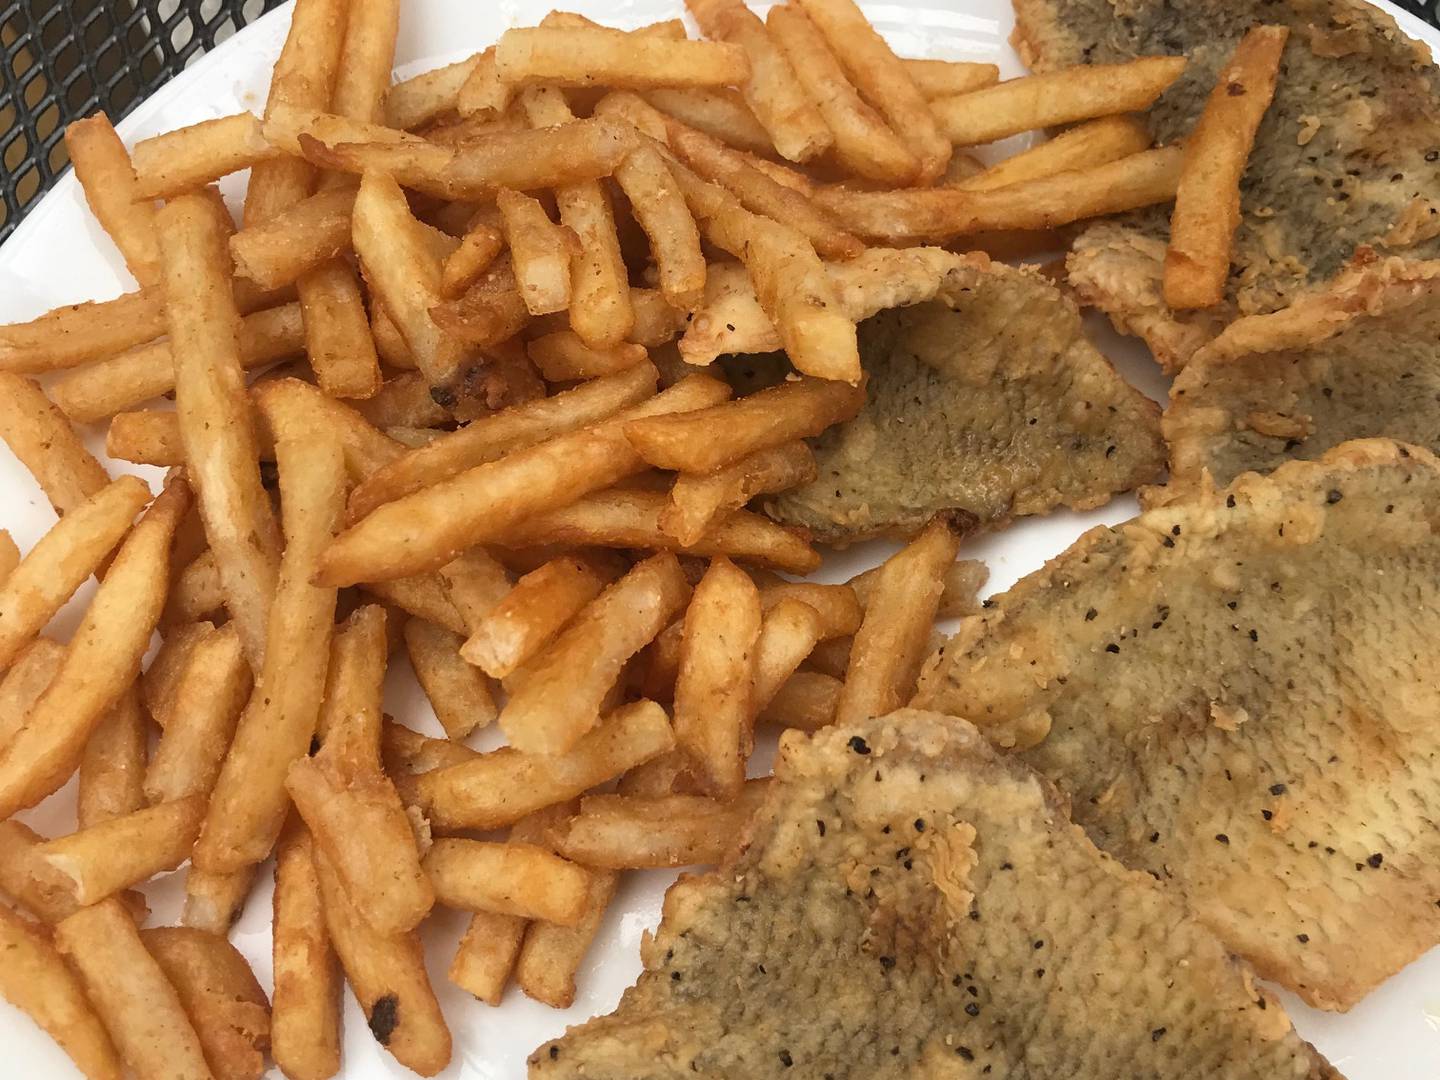 Skoog's Pub & Grill in Utica features several nightly specials. One of the Friday specials is deep-fried bluegill with fries.